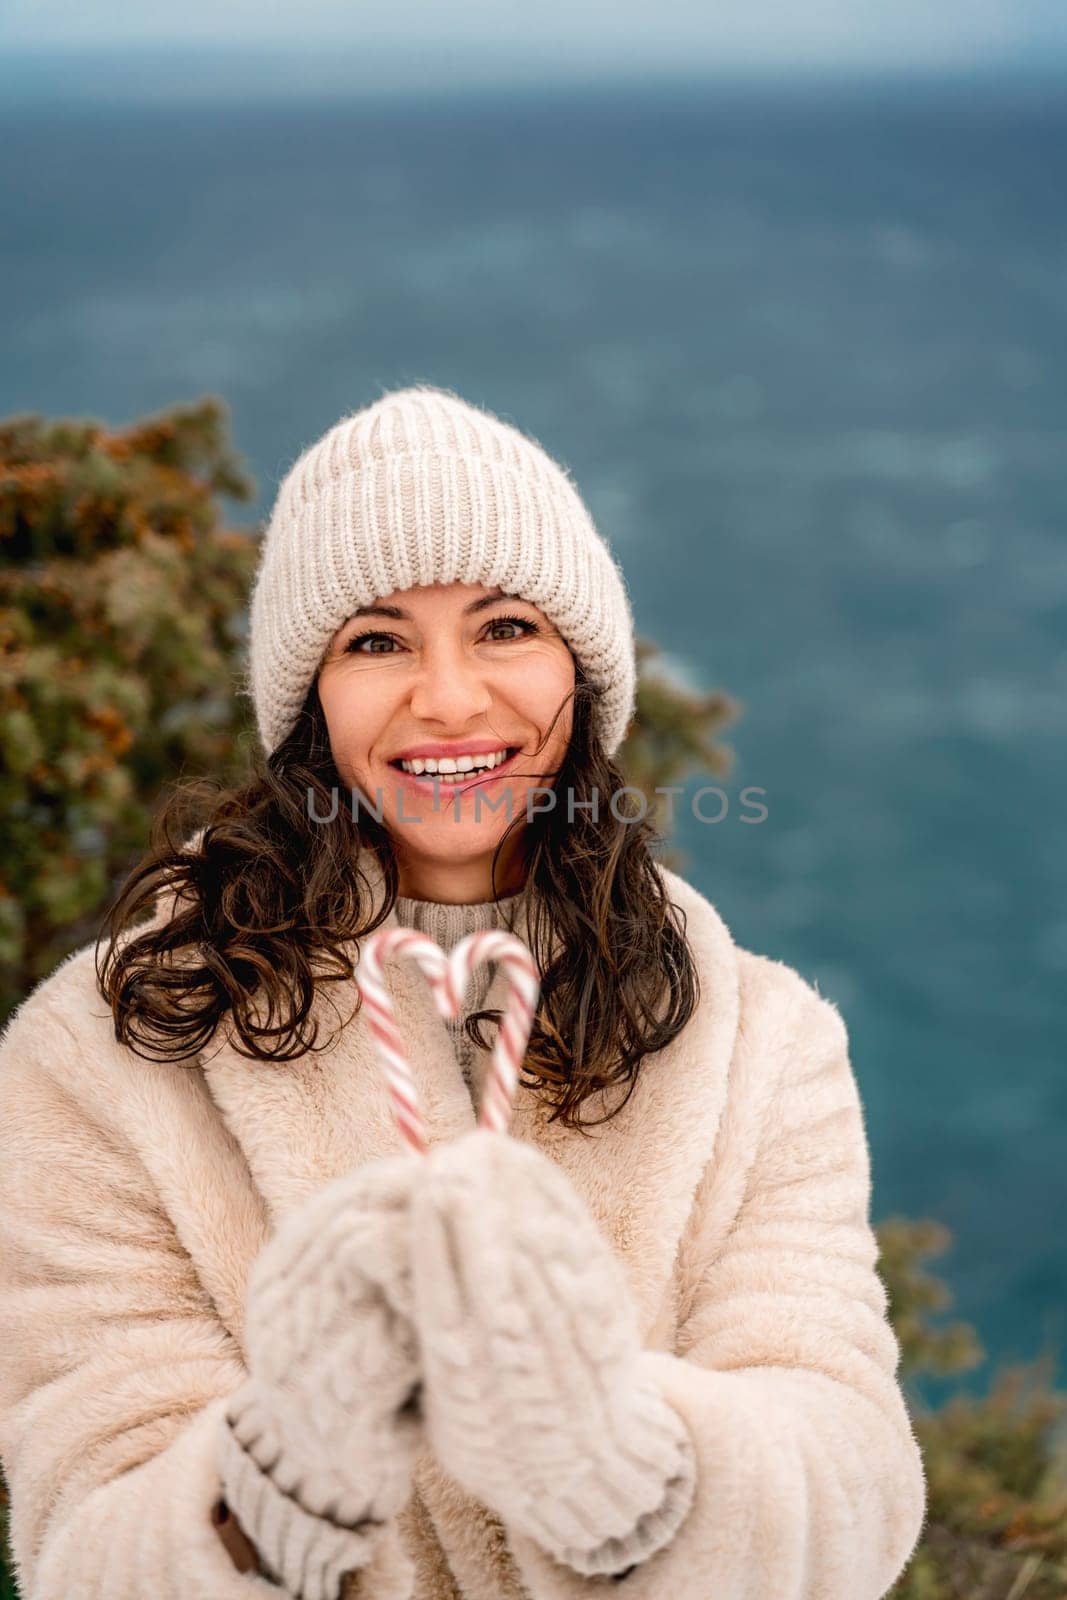 Woman candy sea. Smiling woman in knitted hat, mittens and beige coat holding lollipops candy canes in her hands in shape of heart against the backdrop of the sea. by Matiunina